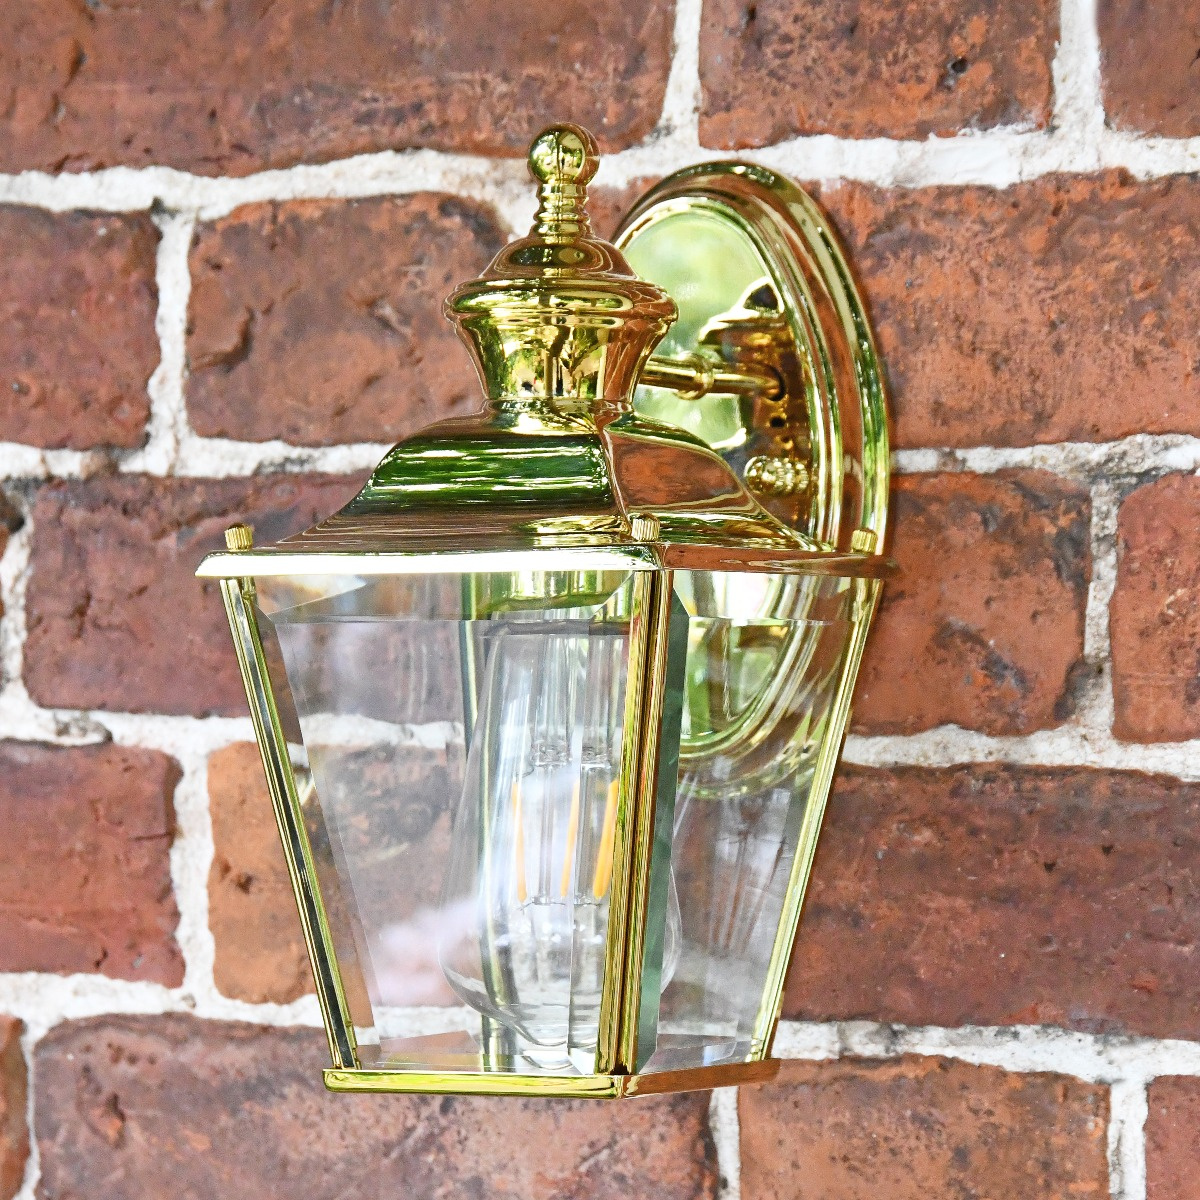 Brass Traditions - Wall Lights